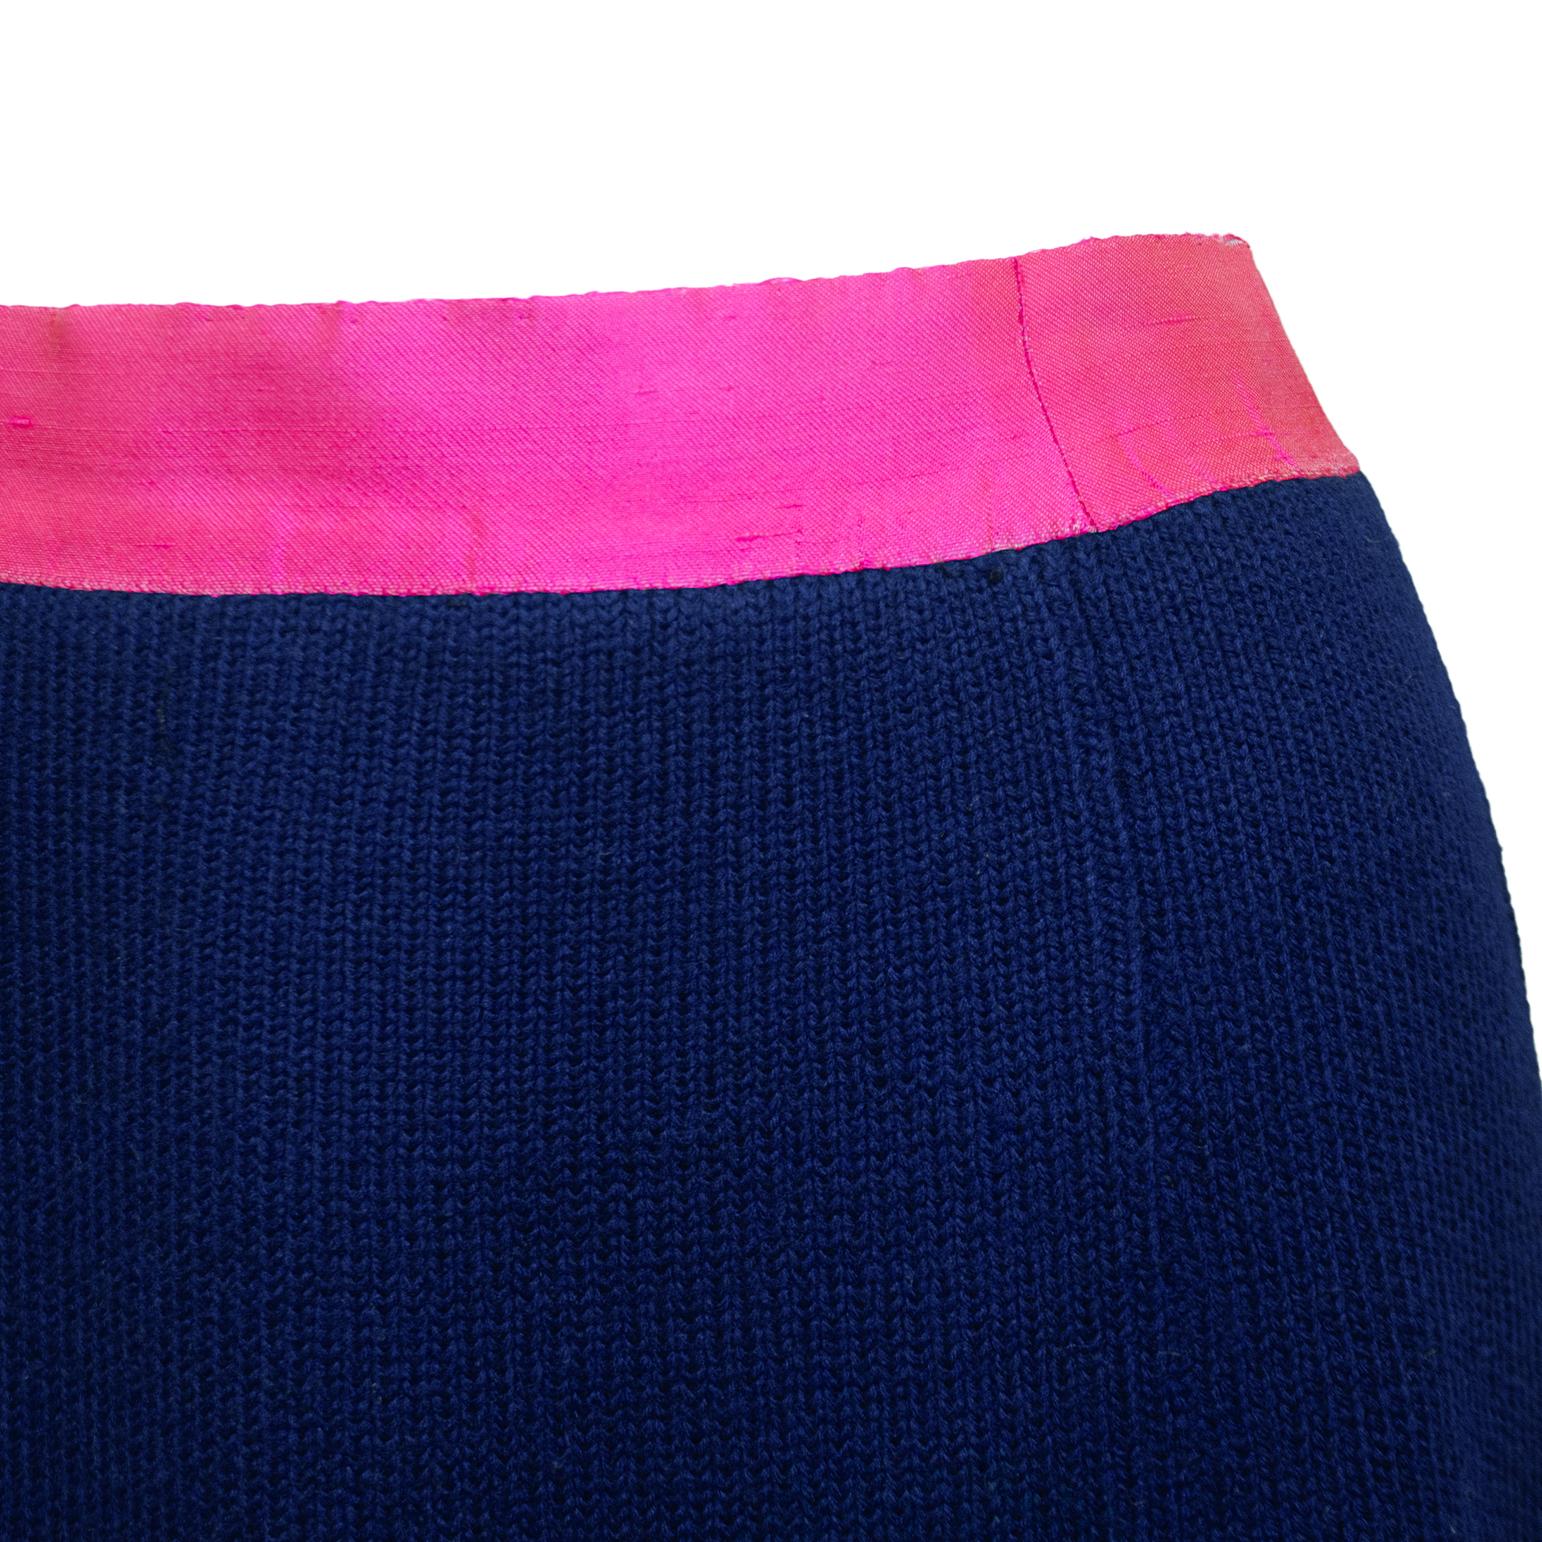 1960s Chanel Haute Couture Navy Blue and Pink Knit Set For Sale 1